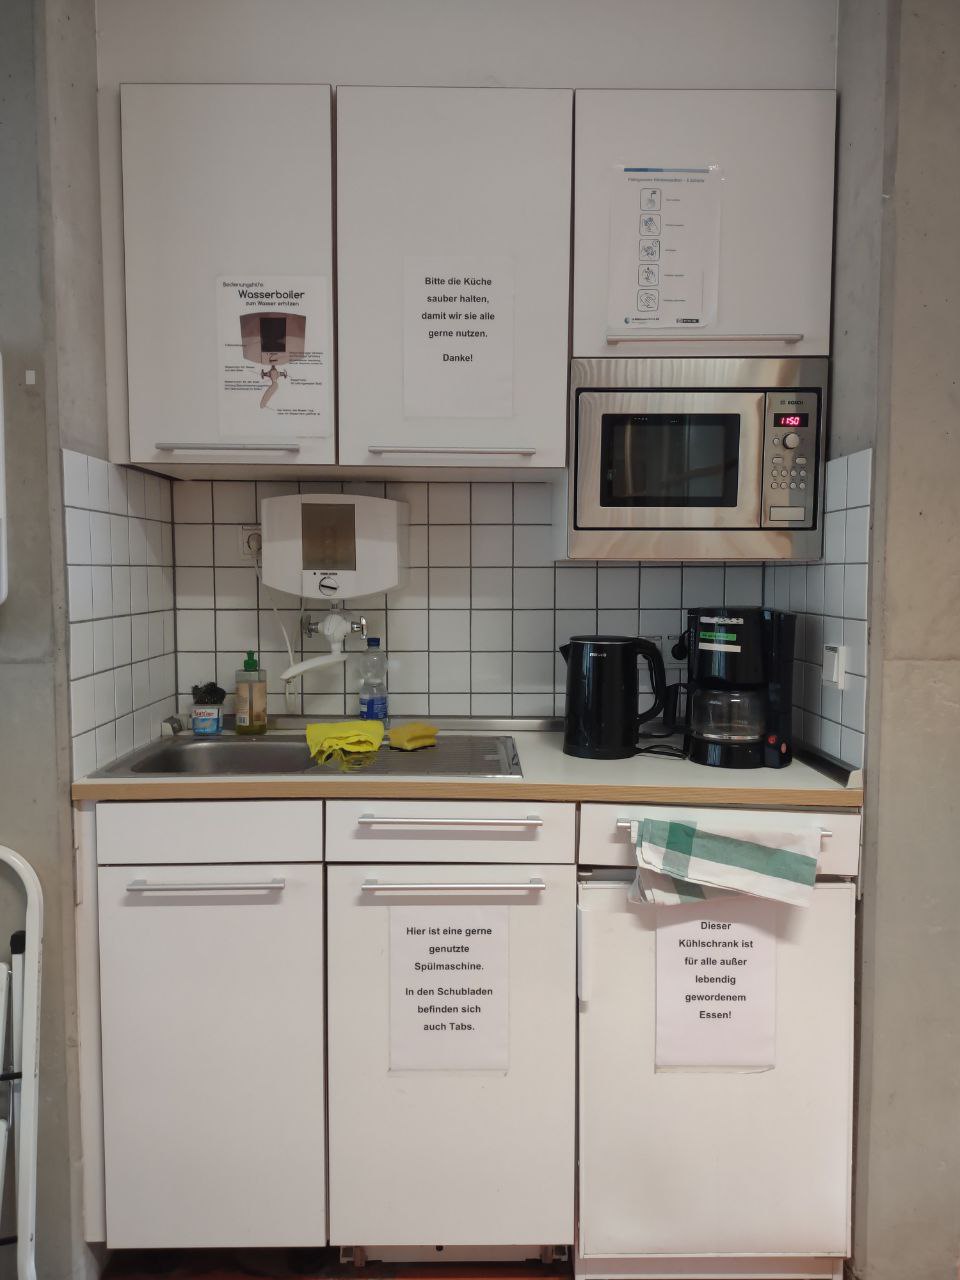 A photo of the kitchen in tidy condition